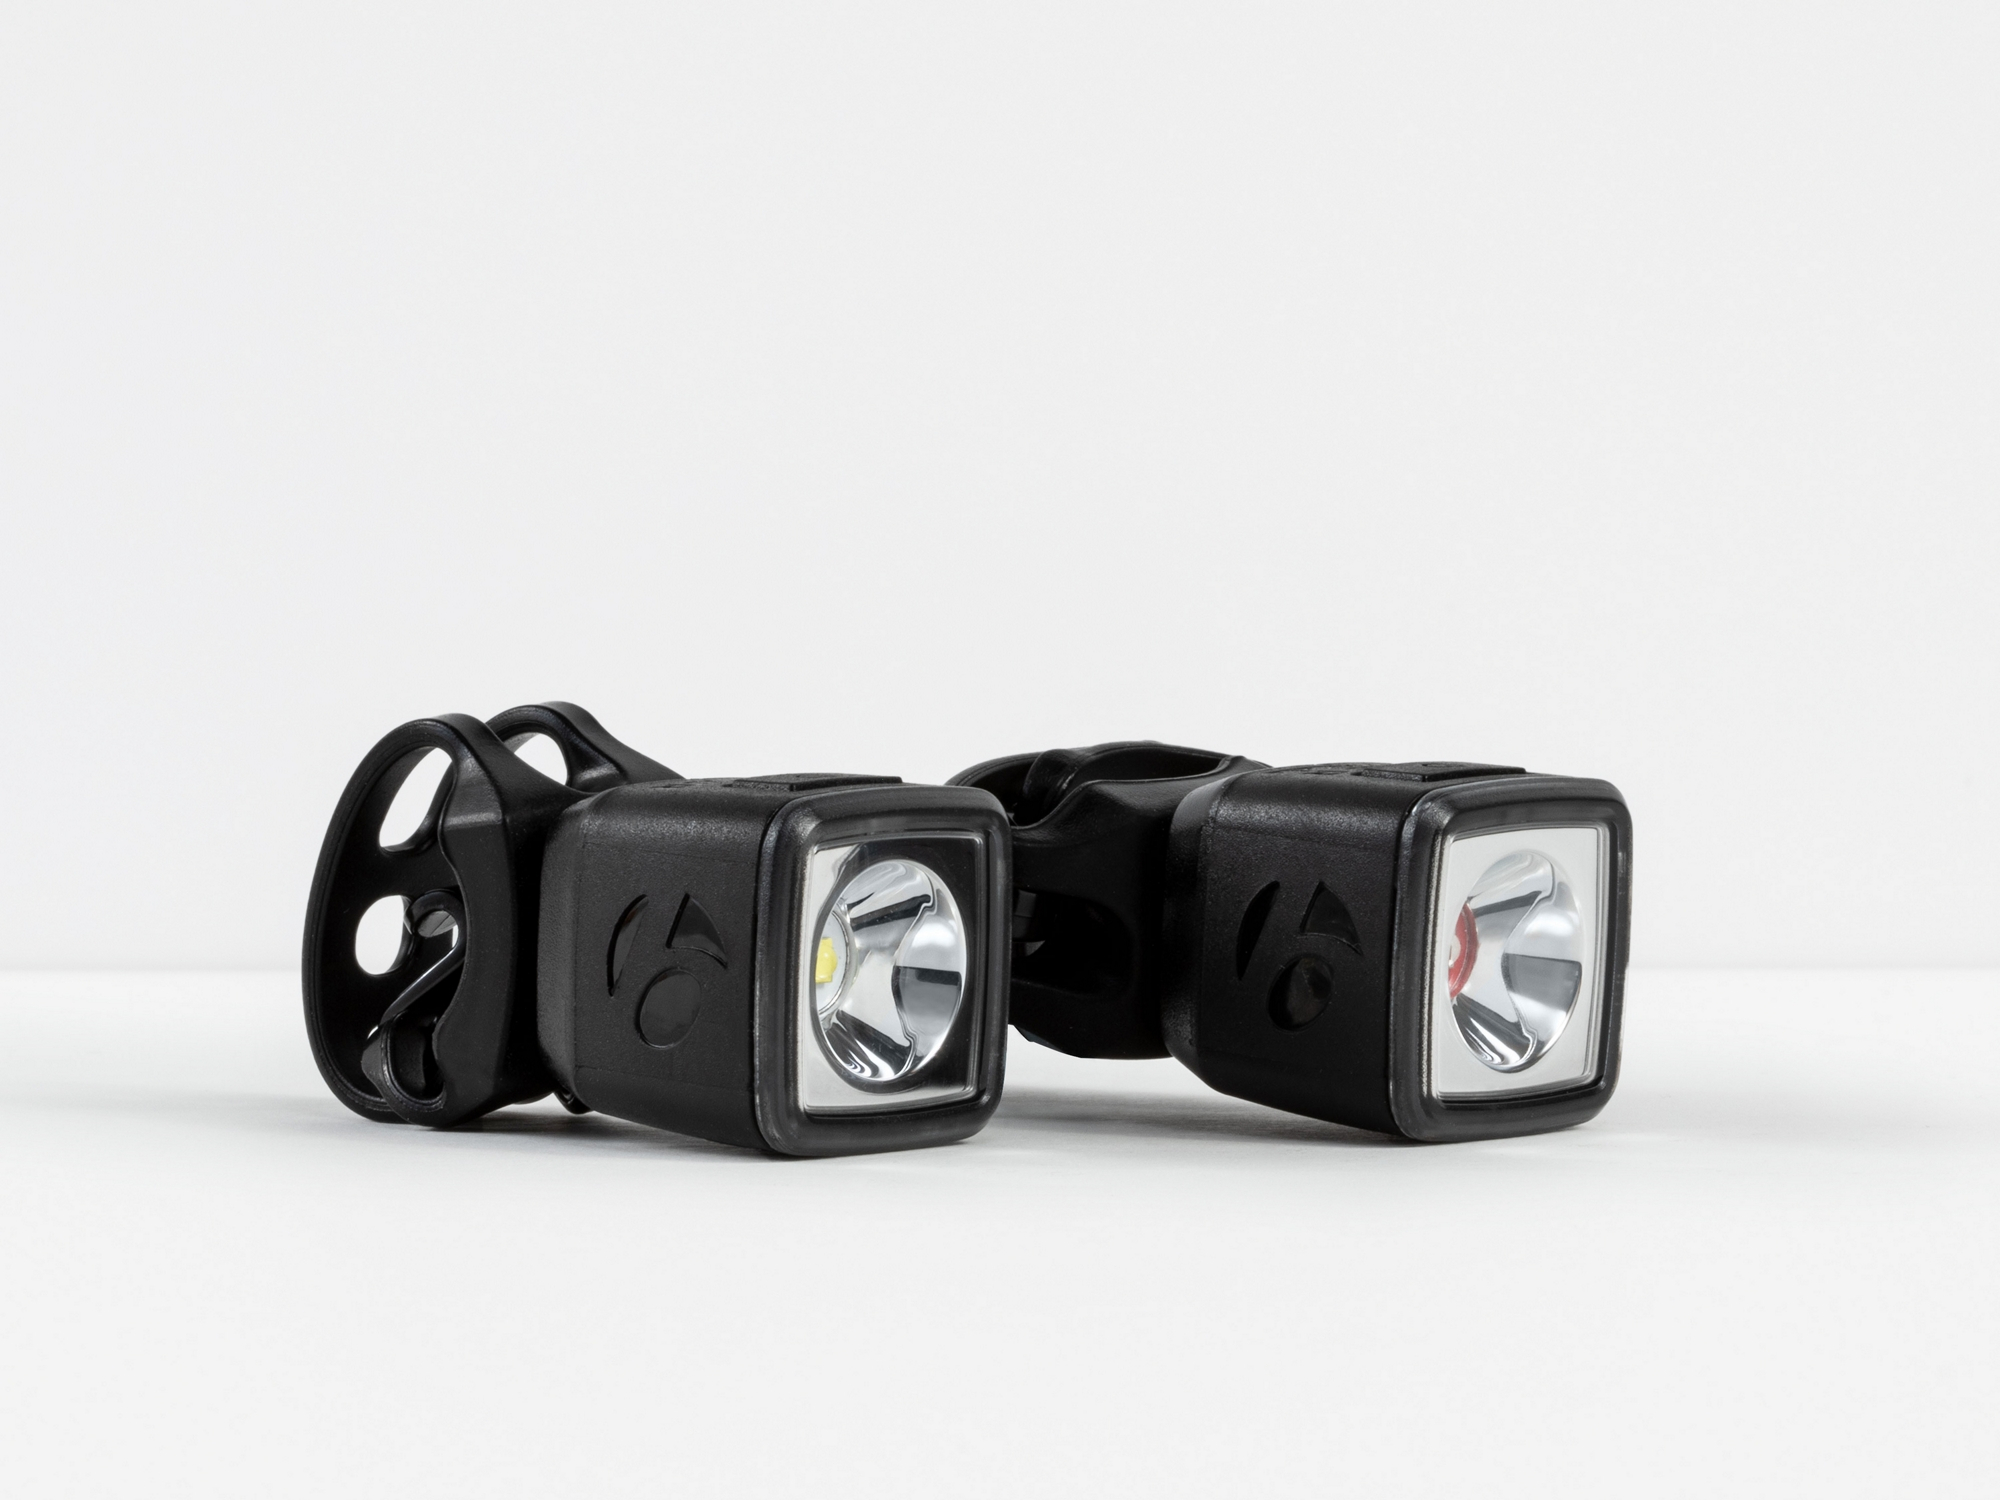 Bontrager Ion 100 R/Flare R City Bike Light Set - The Edge Cycleworks